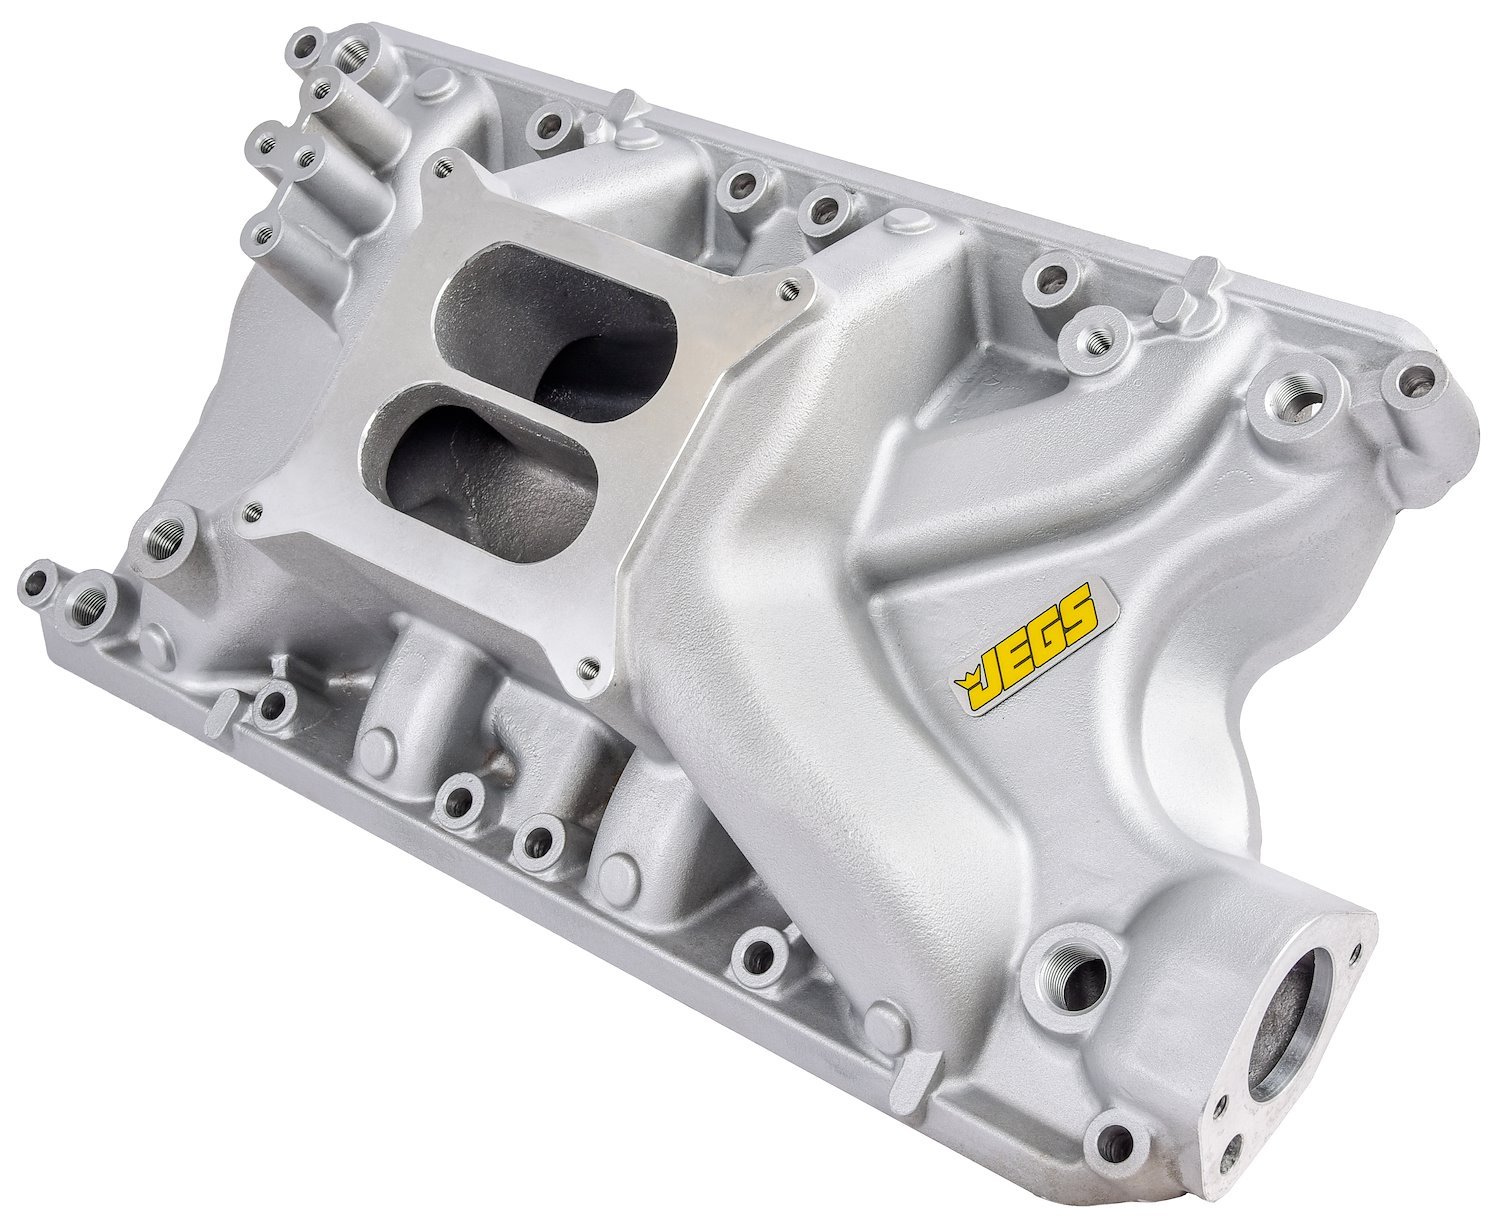 Intake Manifold for 1969-1996 Small Block Ford 351 Windsor, Dual Plane [Satin]